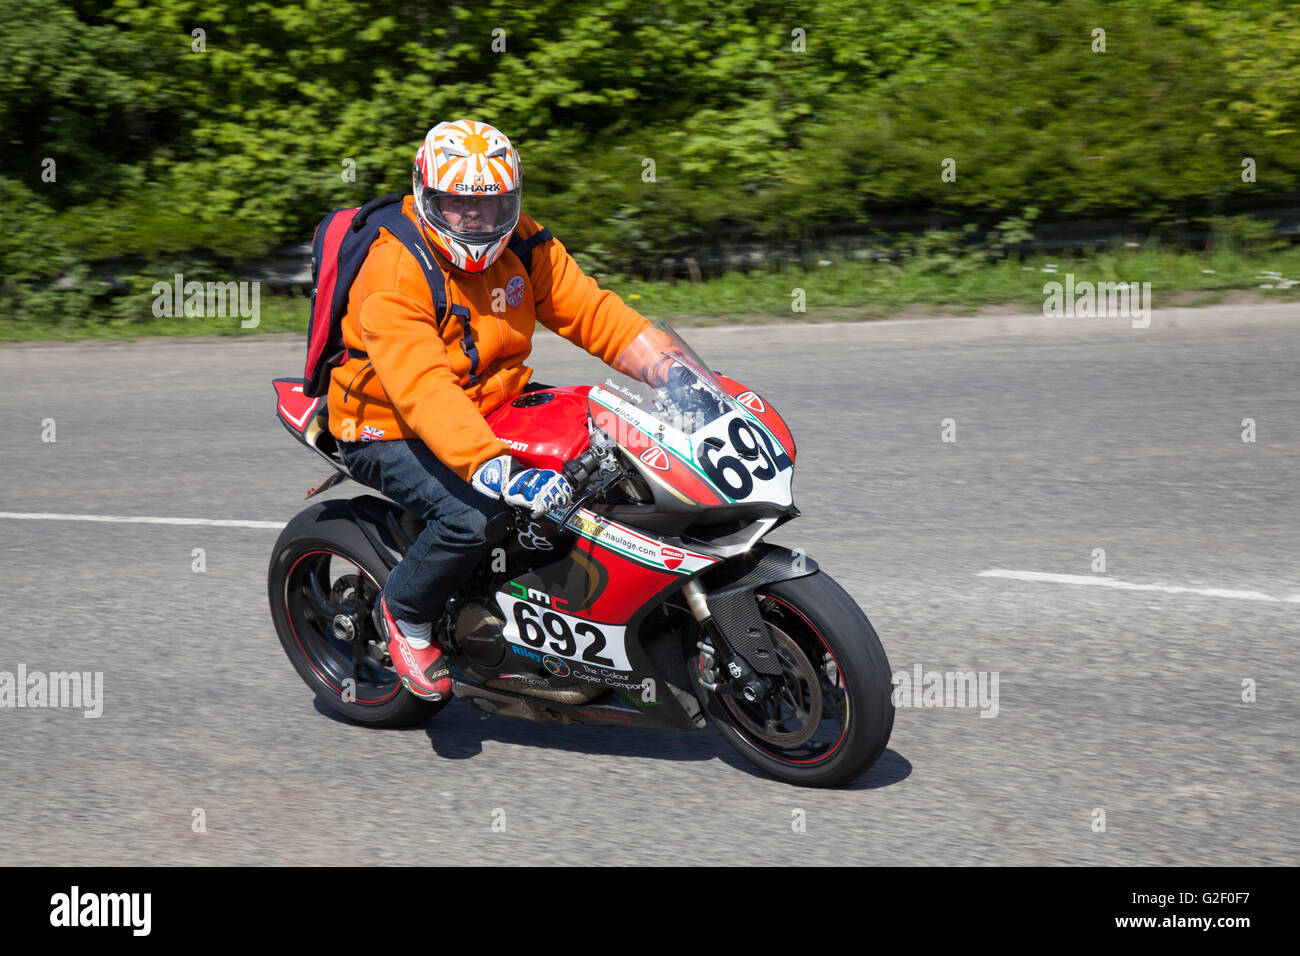 Dave Murphy riding a Ducati 692 wearing a Shark helmet at Pendle Power  Fest, a classic,